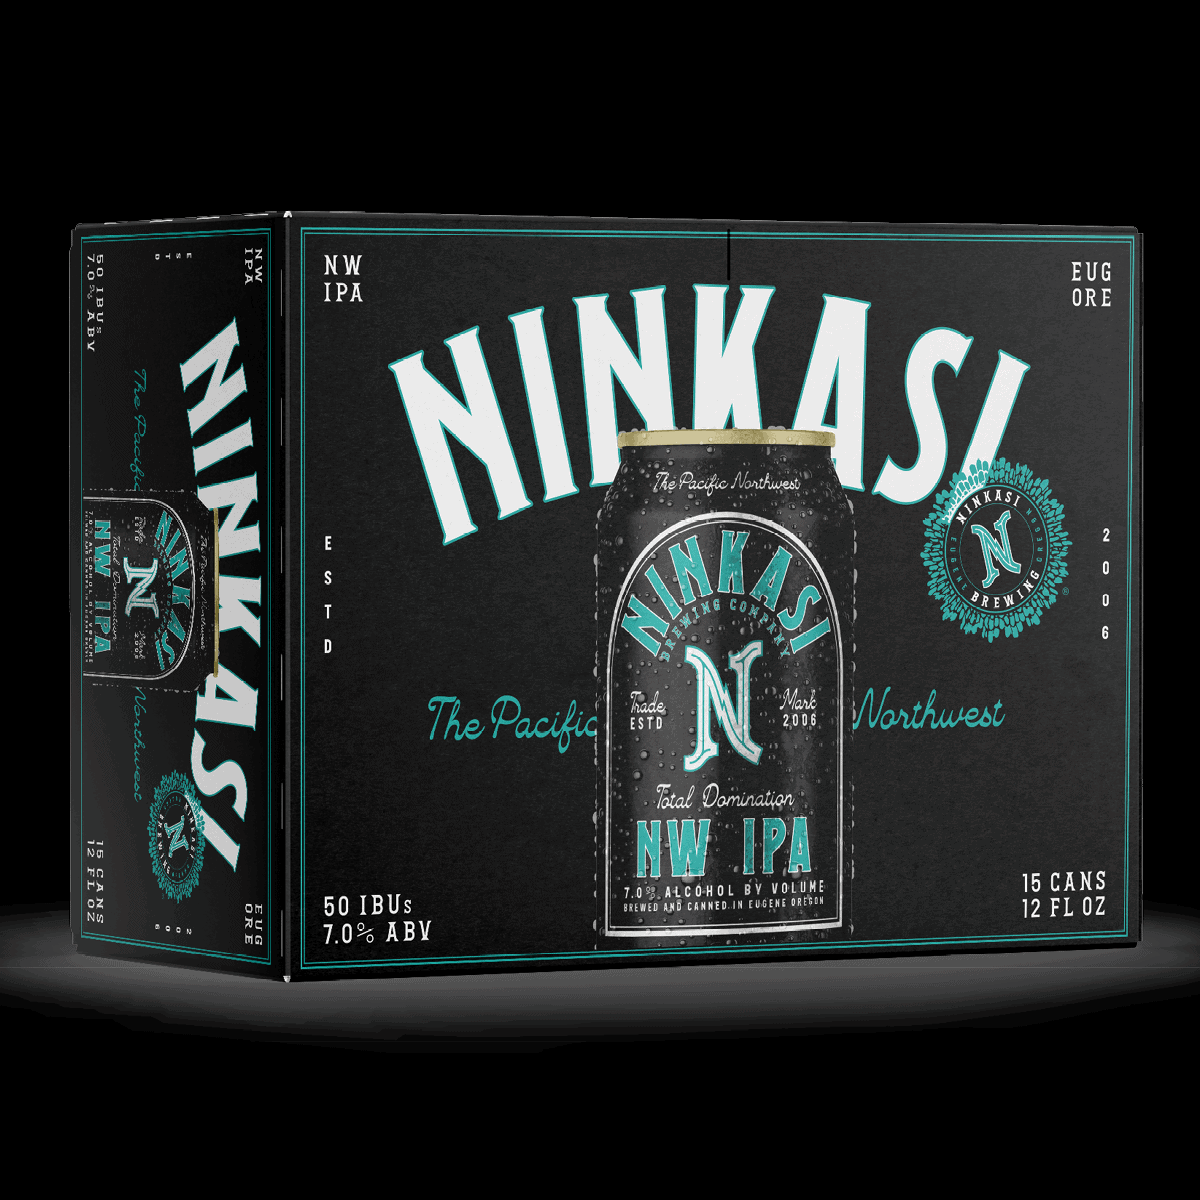 A 3D image of a dark teal Ninkasi beer box with the branding prominently displayed in bright teal lettering. The front of the box showcases a can design for 'Total Domination NW IPA,' with details indicating it has 7.0% ABV and 50 IBUs. There's a tagline 'The Pacific Northwest' and the brand's origin from 'EUG ORE' signifying Eugene, Oregon. The side panel reads 'NW IPA' and has the Ninkasi logo. The box mentions it contains 15 cans, each of 12 FL OZ.